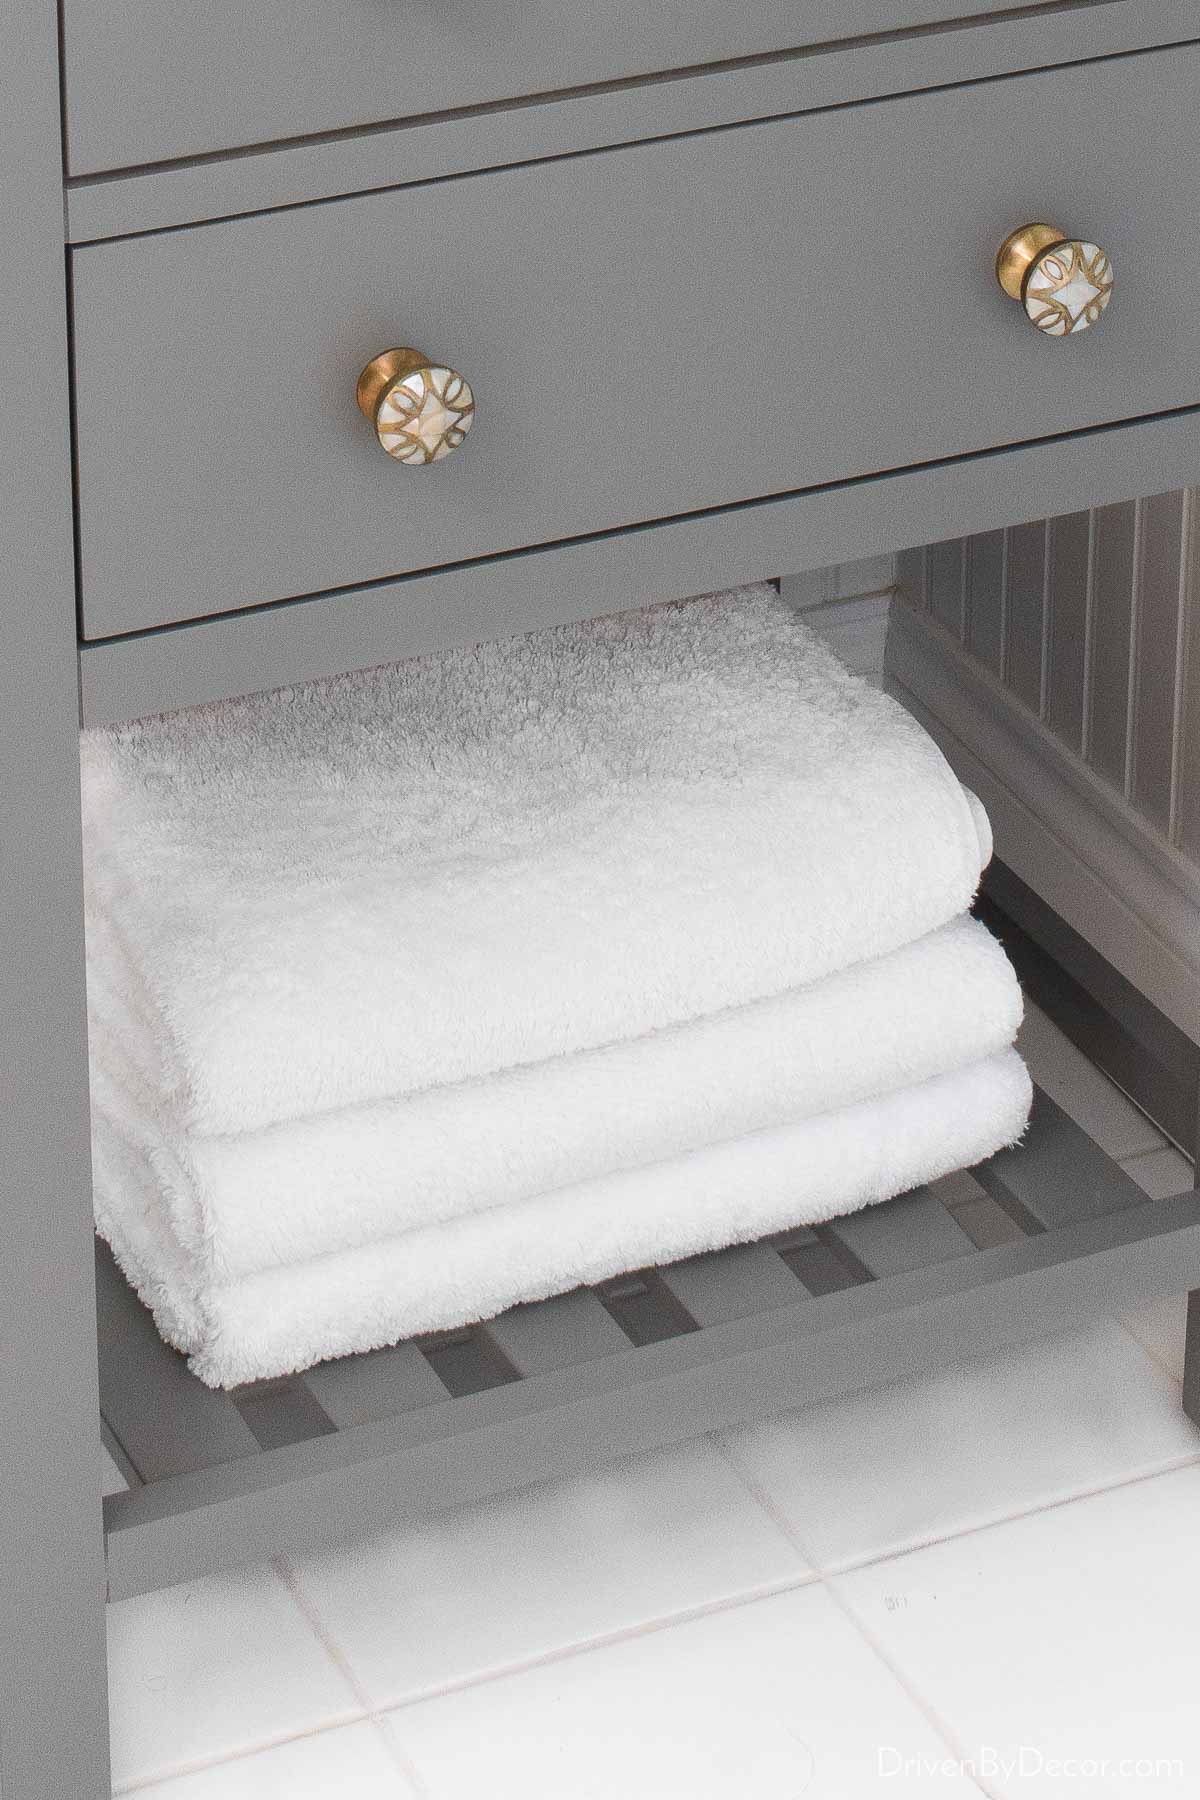 Guest bathroom towels on the shelf of our vanity